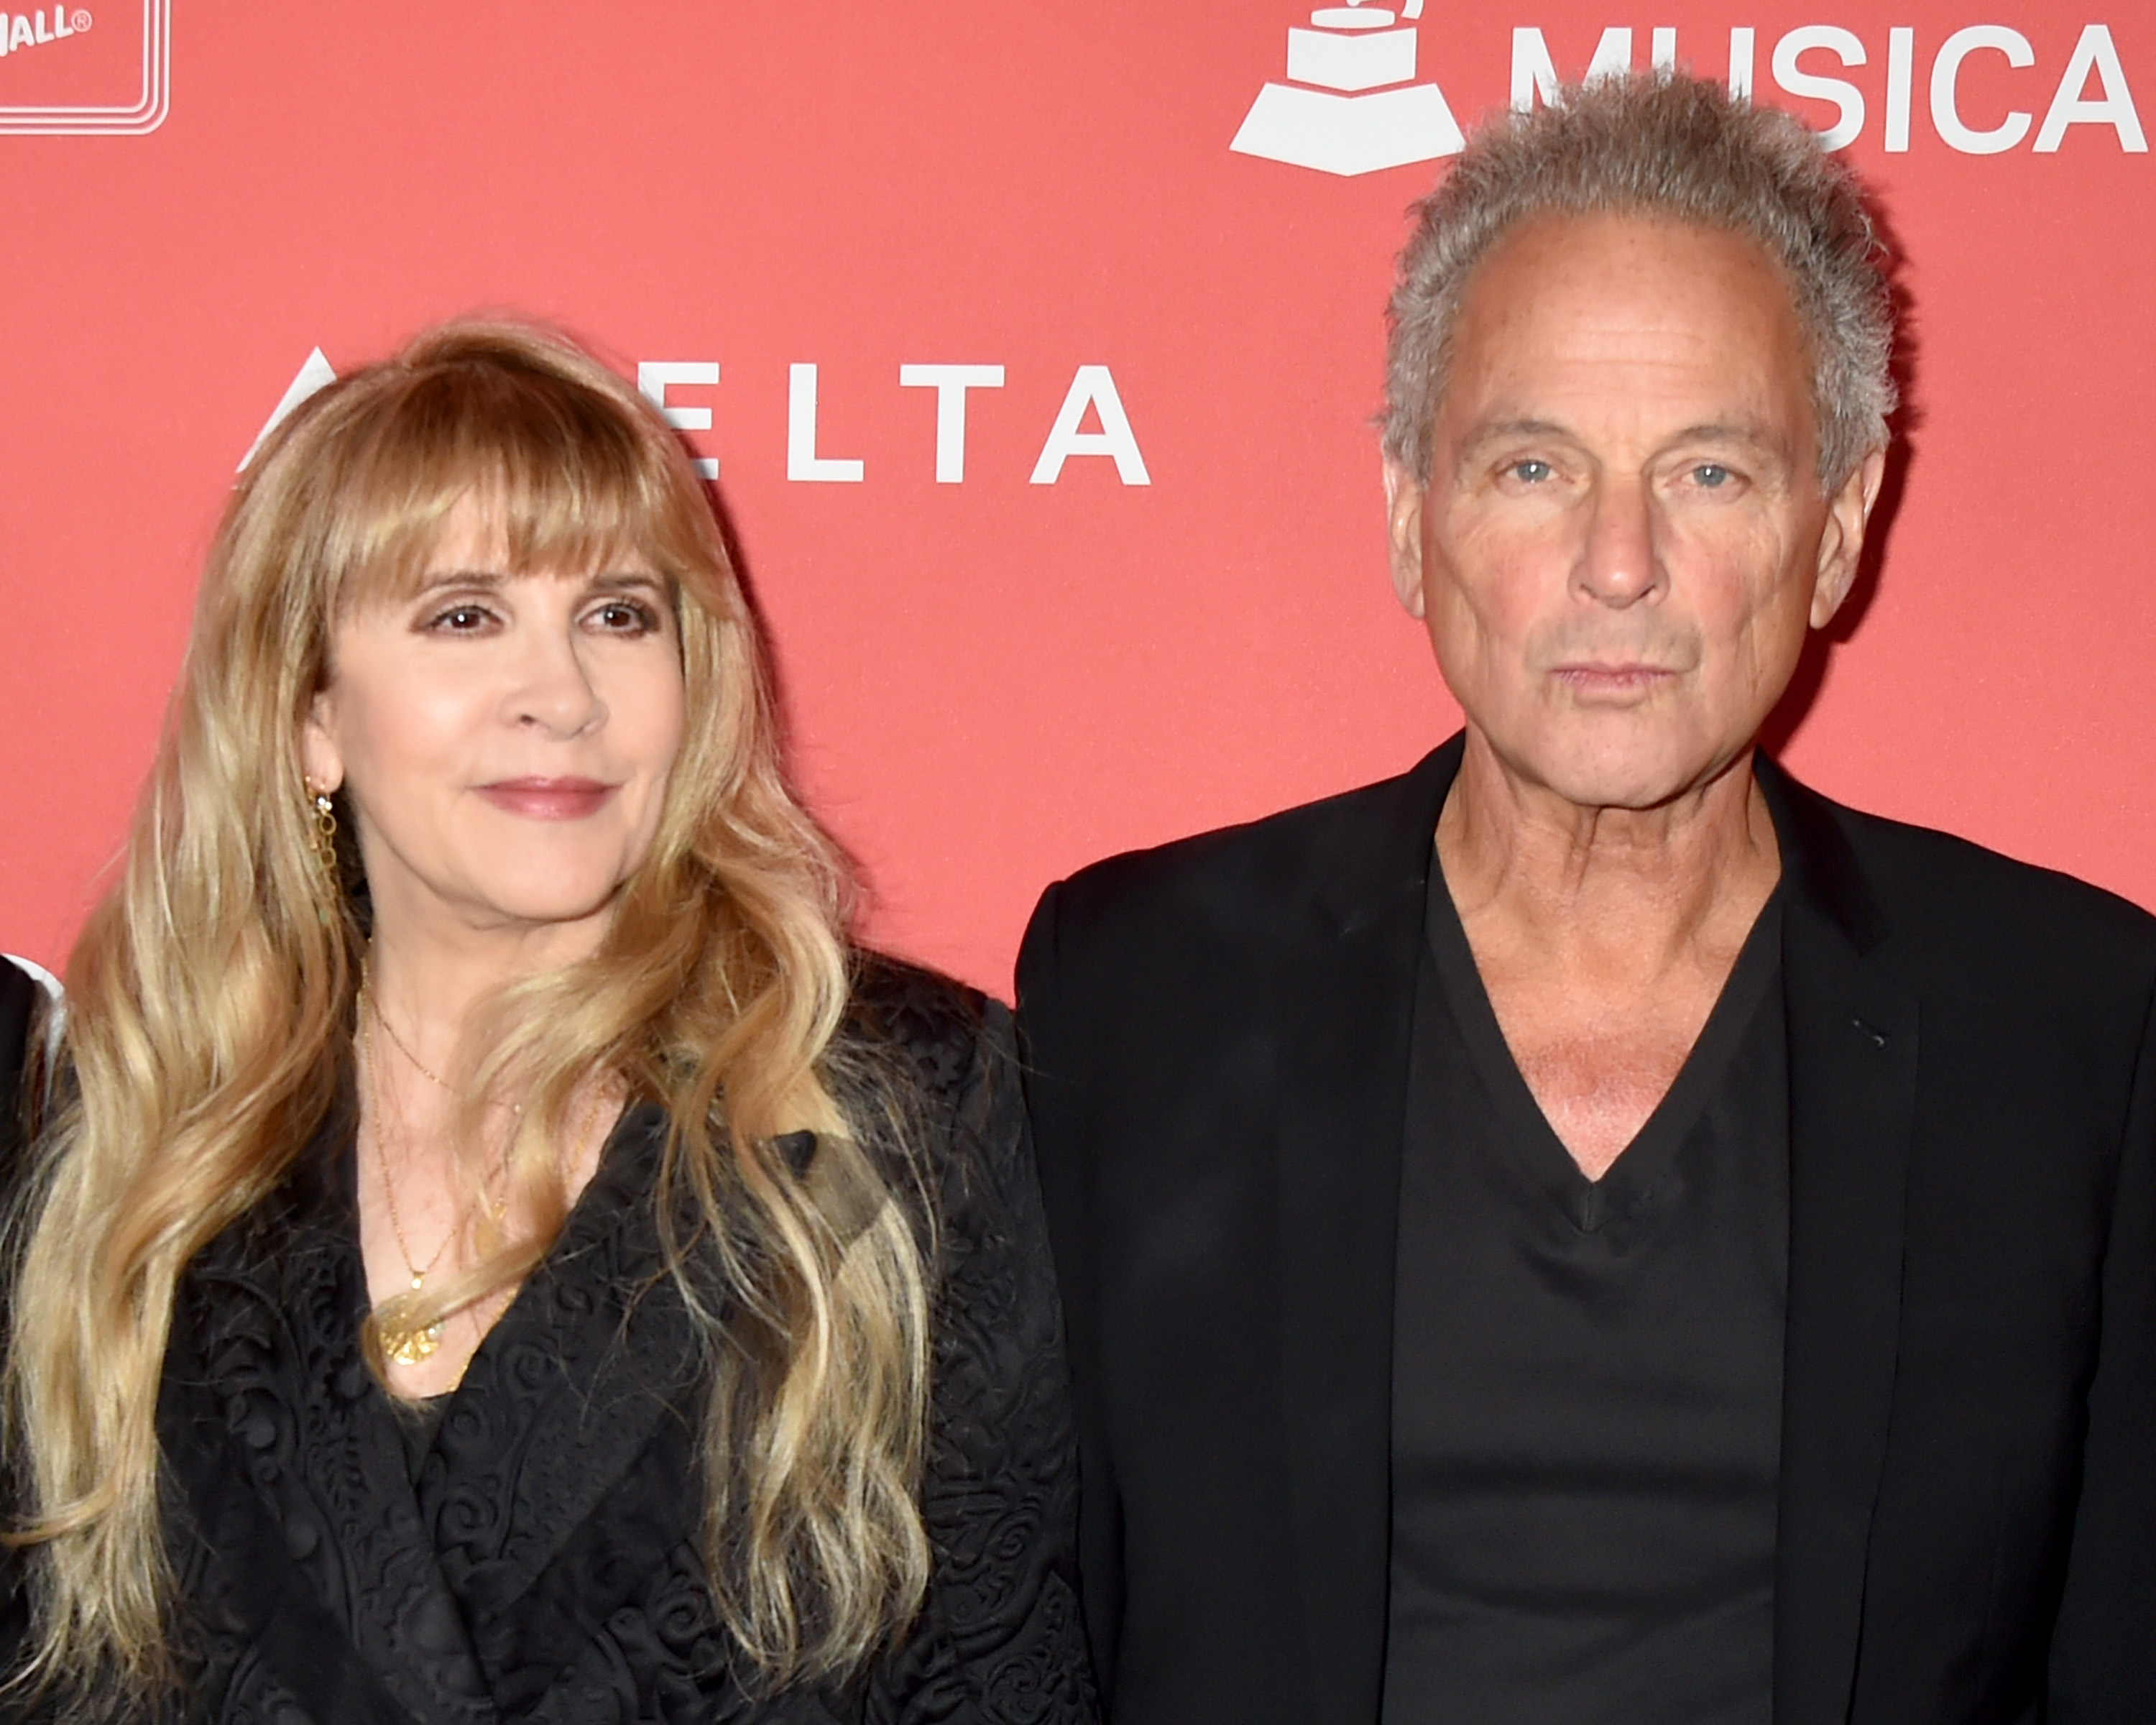 Stevie Nicks and Lindsey Buckingham wear black outfits and stand against an orange background.